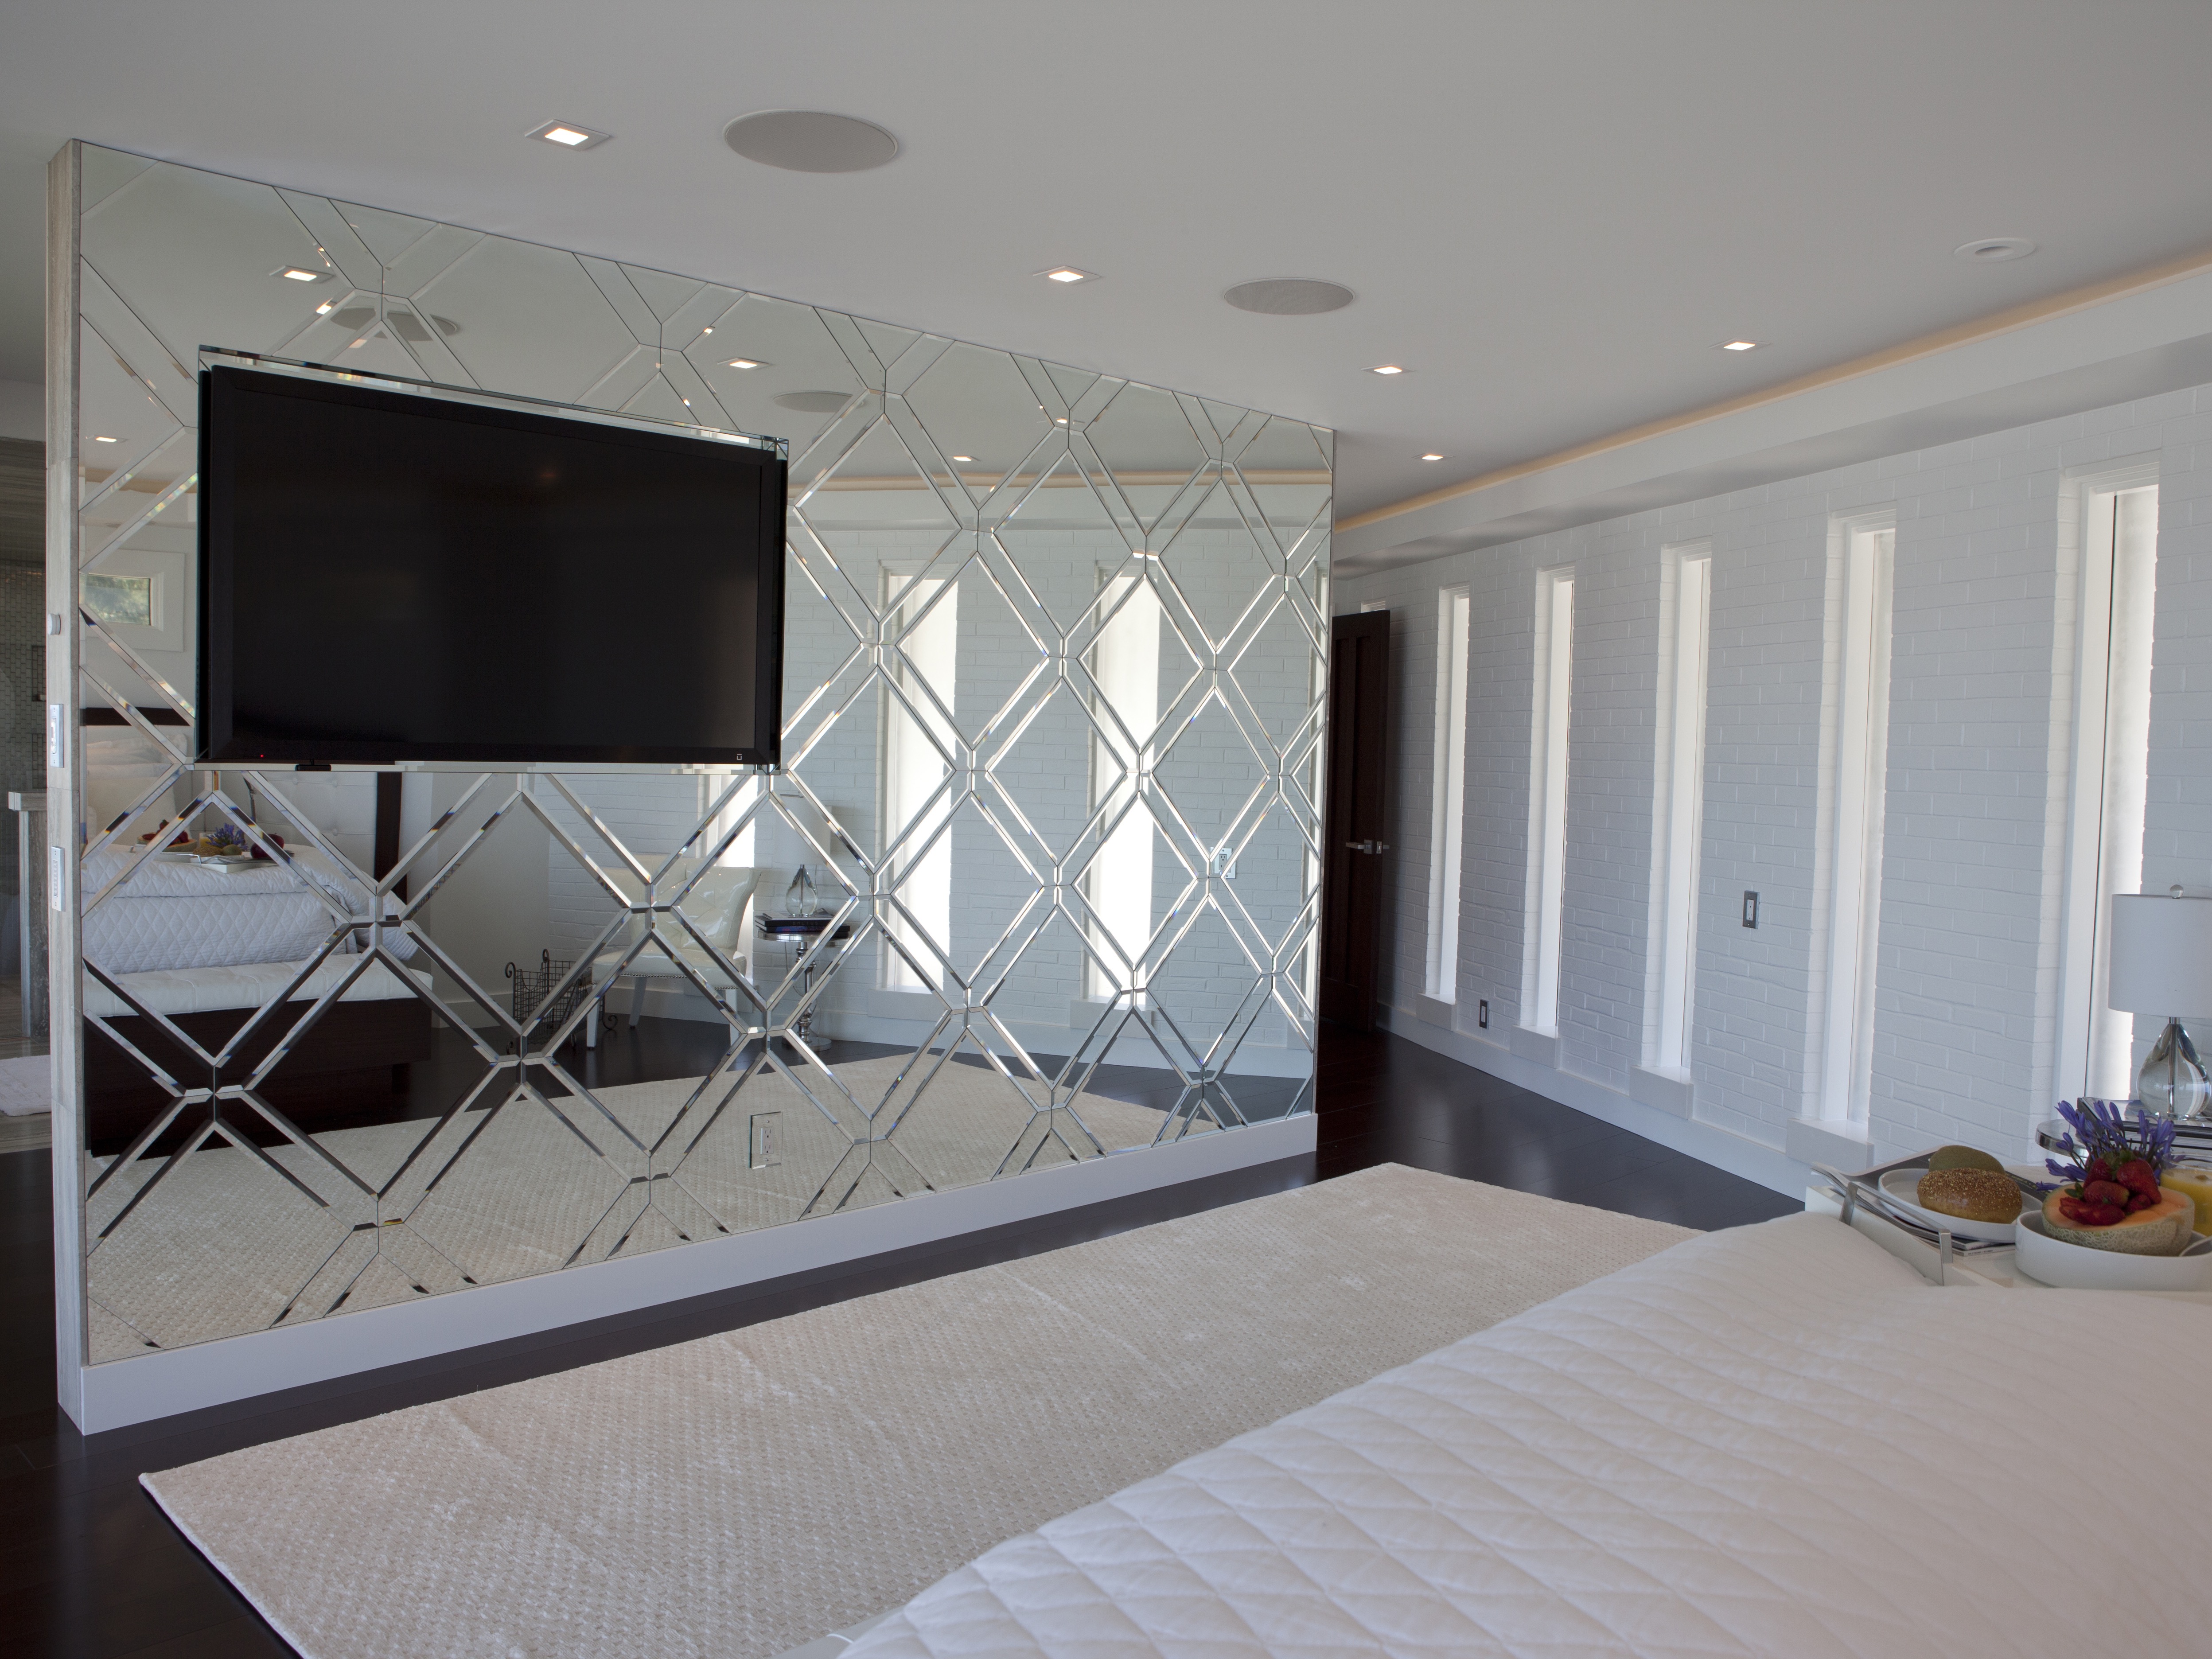 Mirrored Marvel: Reflecting Style With Mirrored Bedroom Ceiling Designs